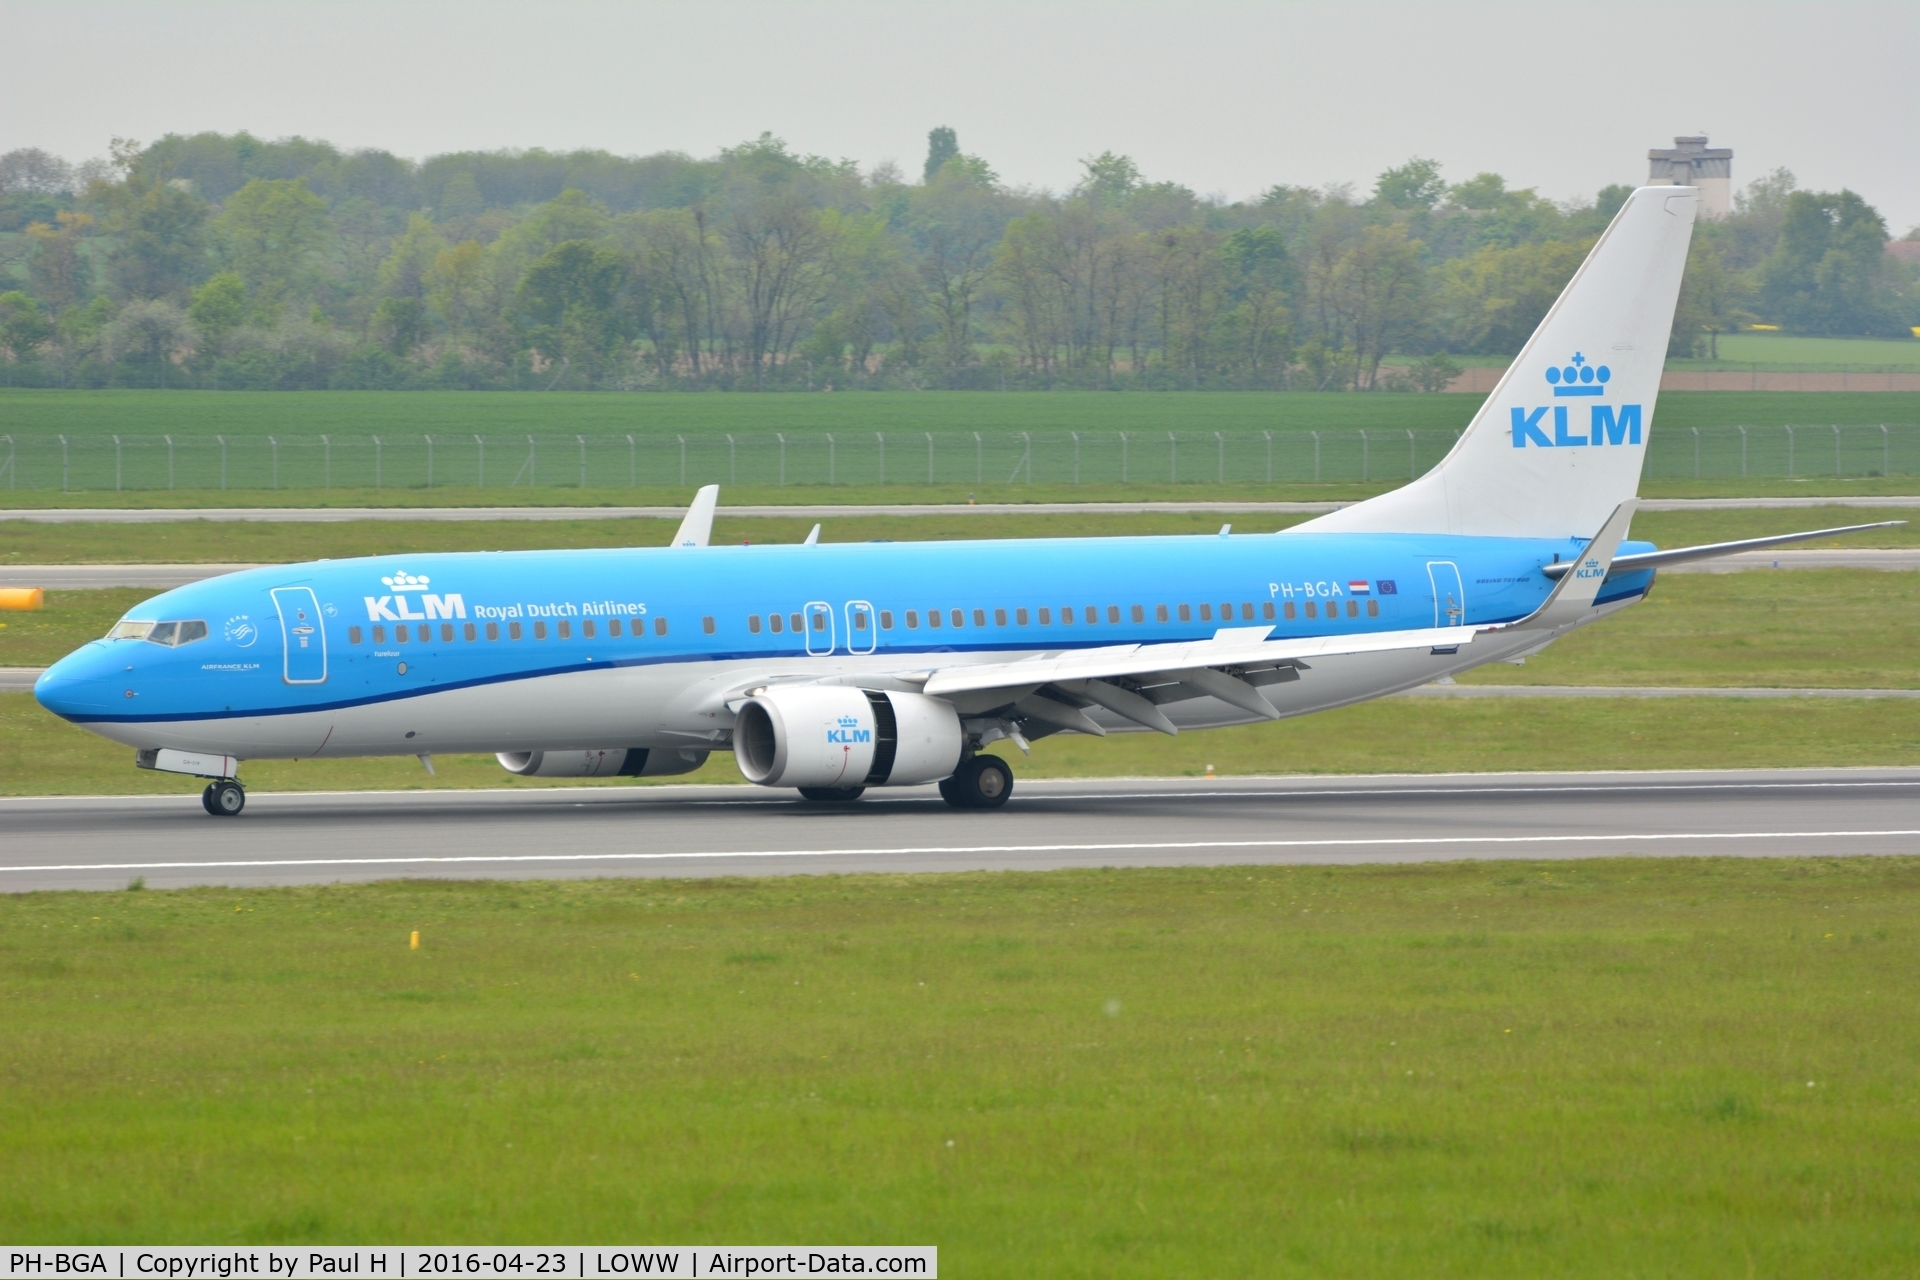 PH-BGA, 2008 Boeing 737-8K2 C/N 37593, KLM Boeing 737 with the new livery at VIE/LOWW